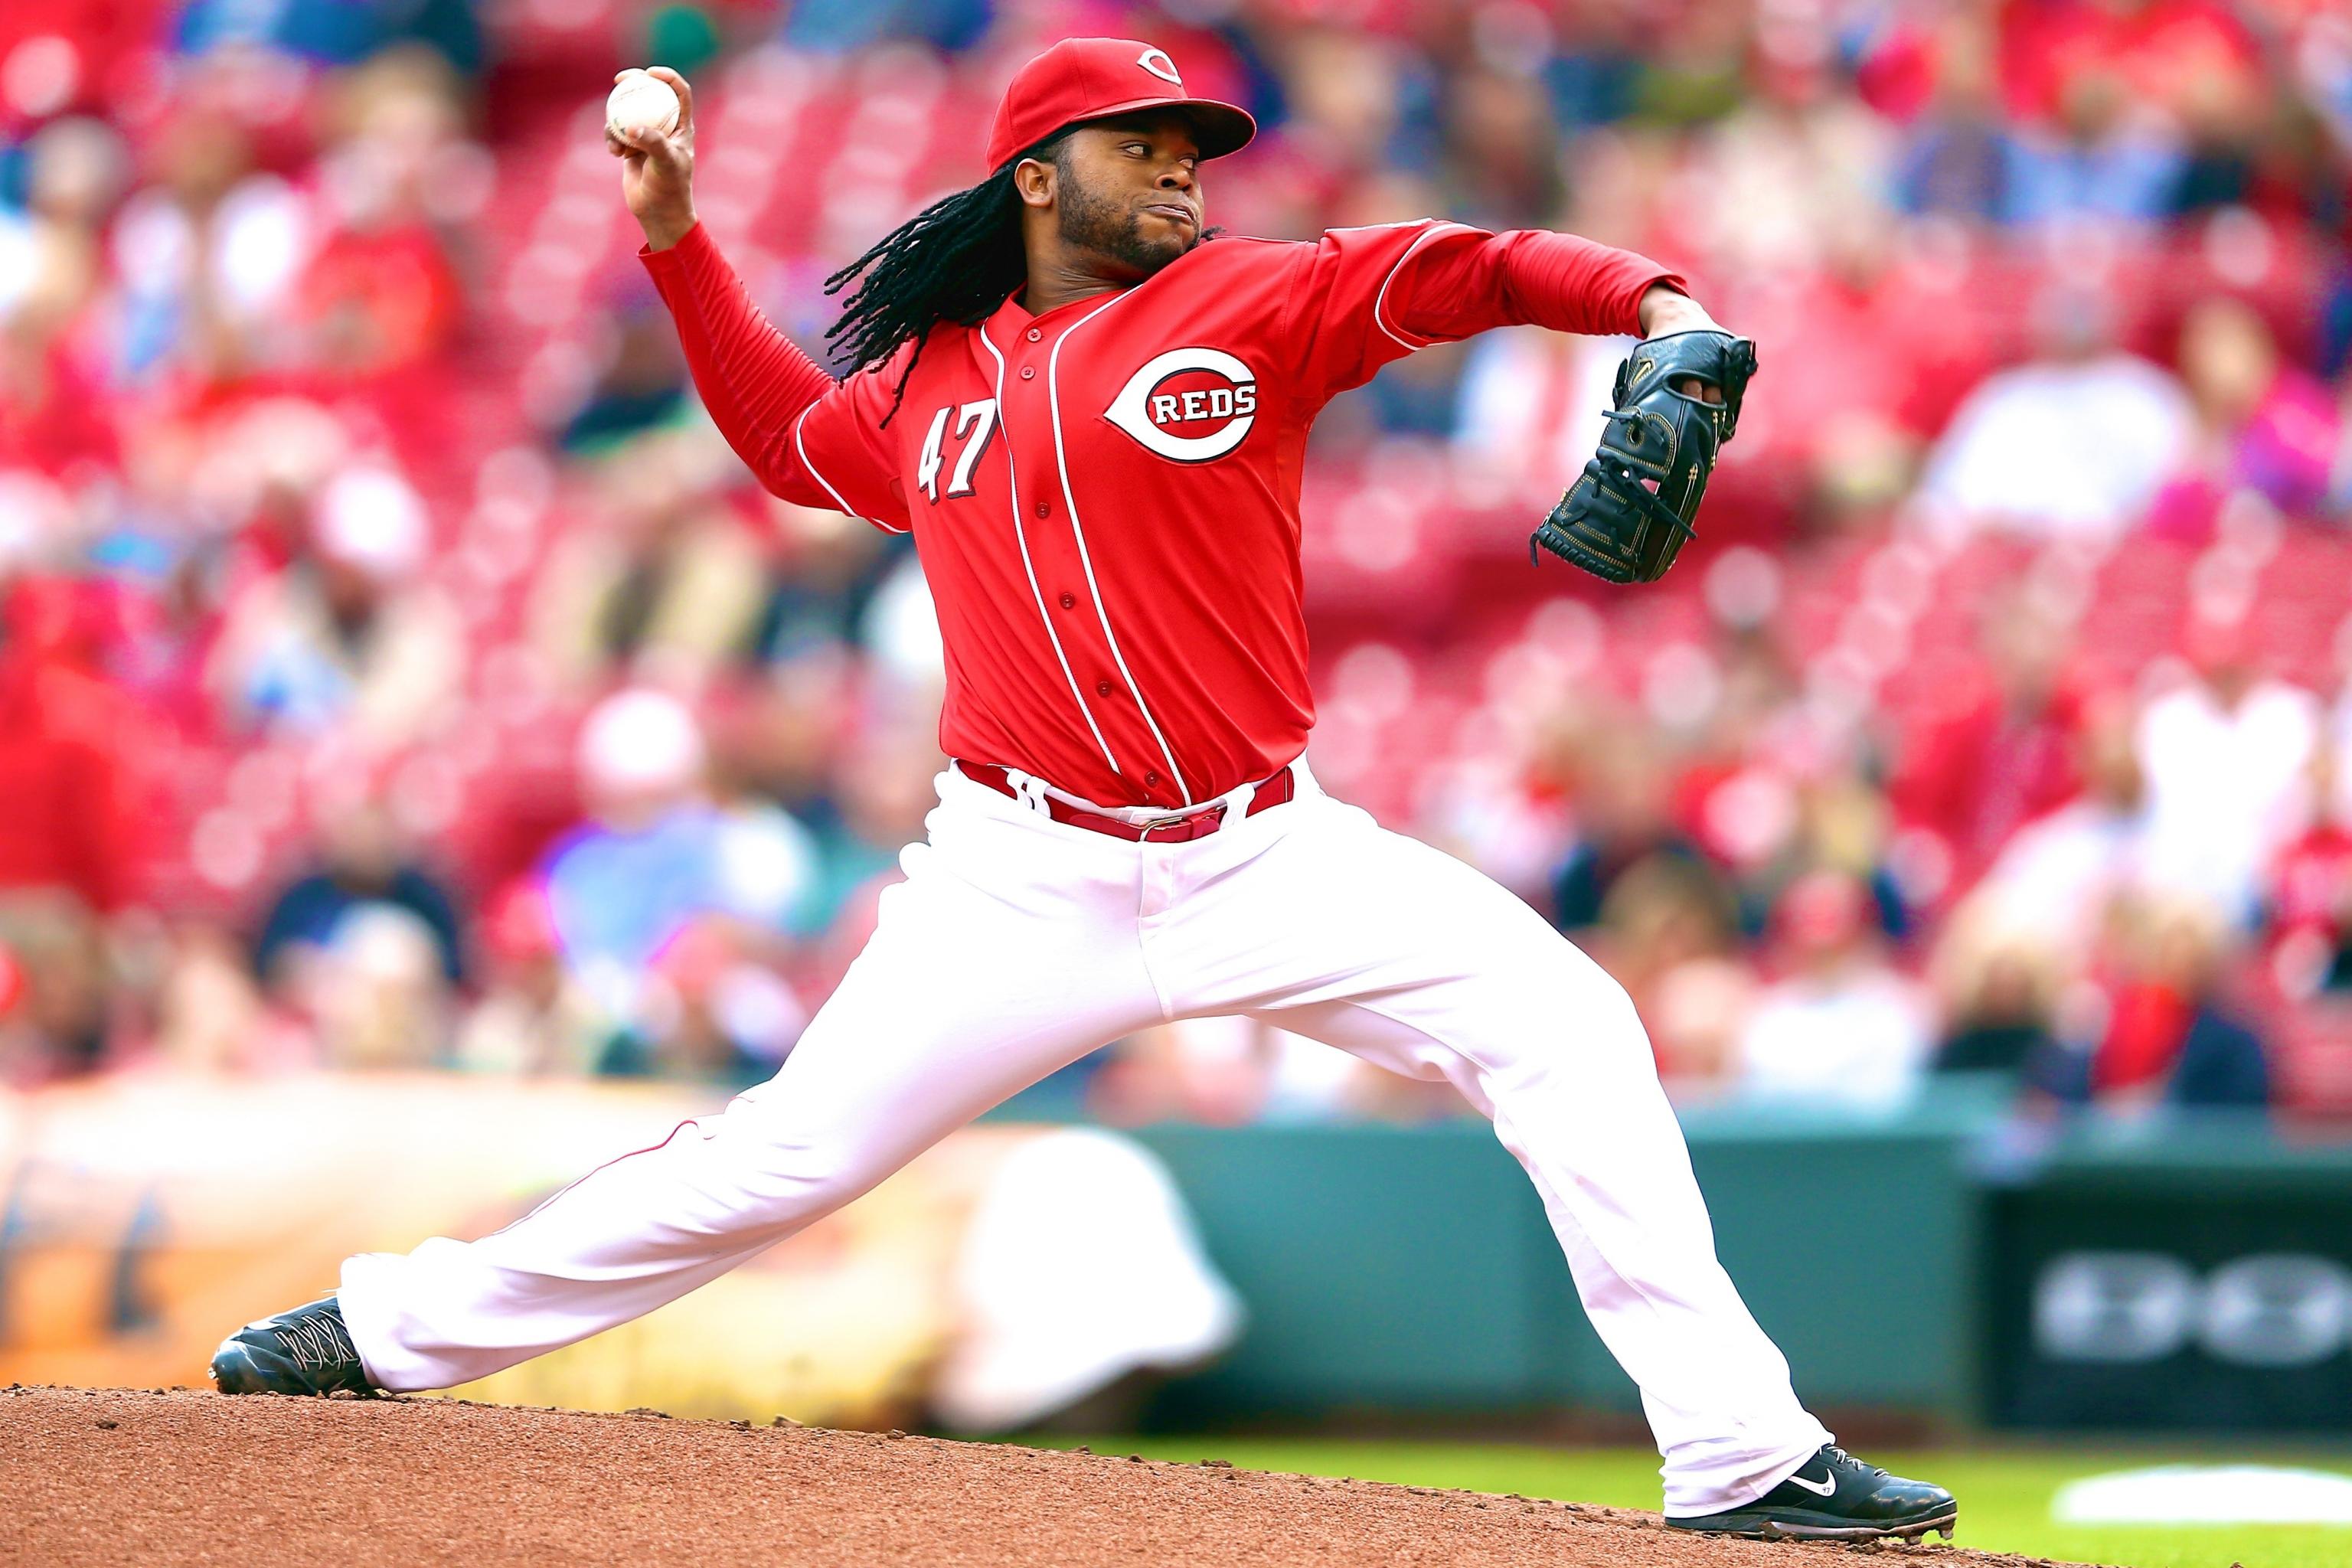 Cueto told he was traded 10 minutes before pitching gem